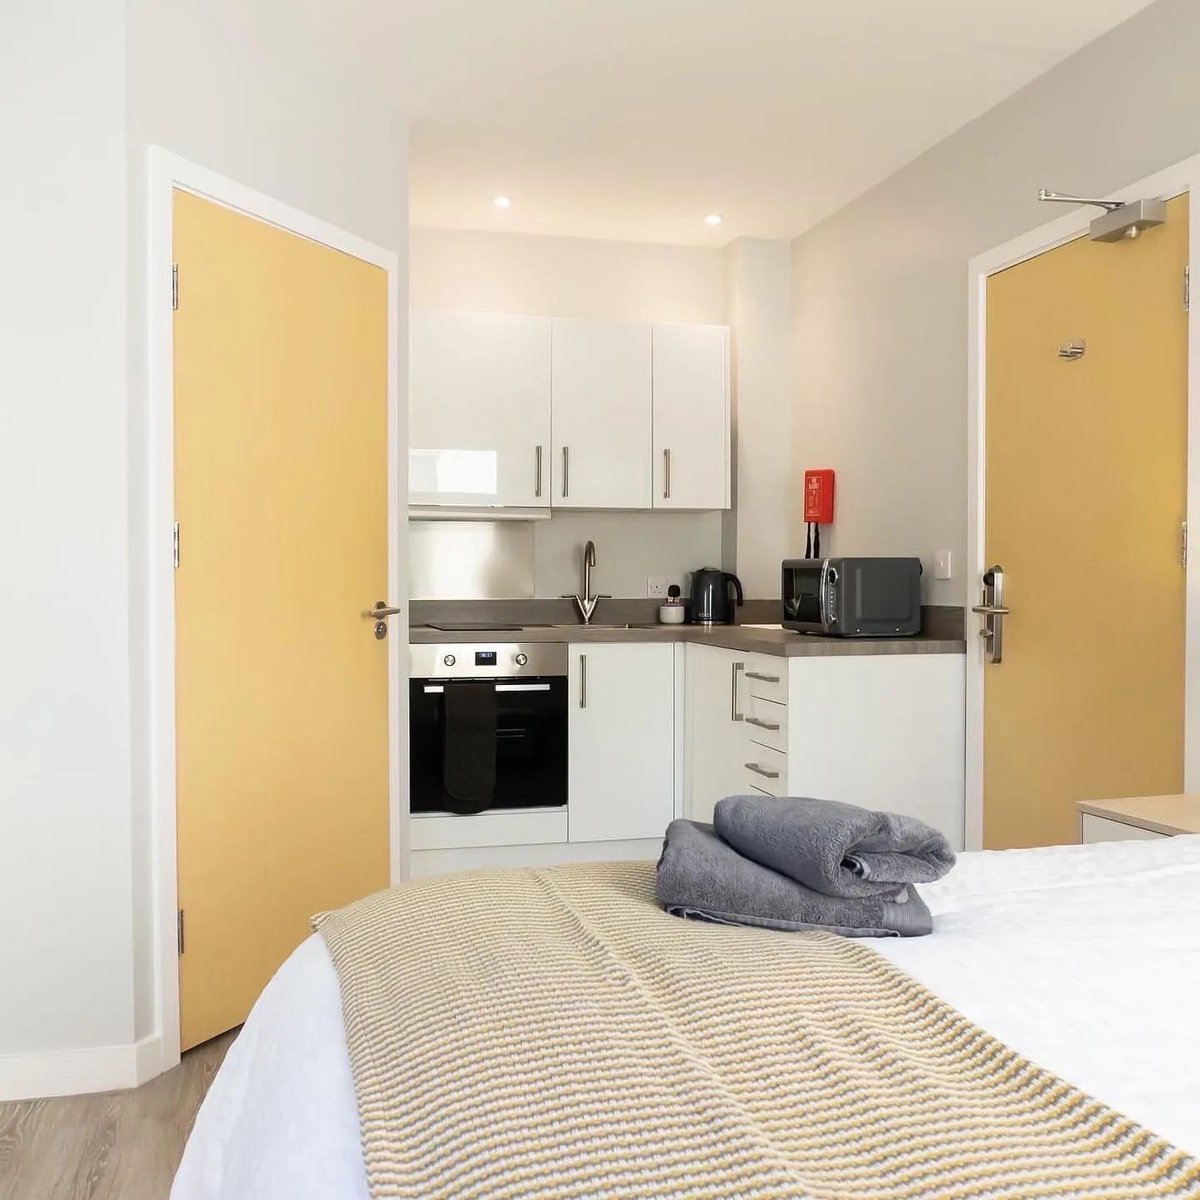 Experience self-sufficient living in #Cheltenham with #StayLets! Our #servicedapartments feature parquet floors, fully equipped kitchens, dishwashers, dining areas, flat-screen TVs and comfortable beds 🧡 Book your stay now! buff.ly/2VMnM79 #CheltenhamApartments